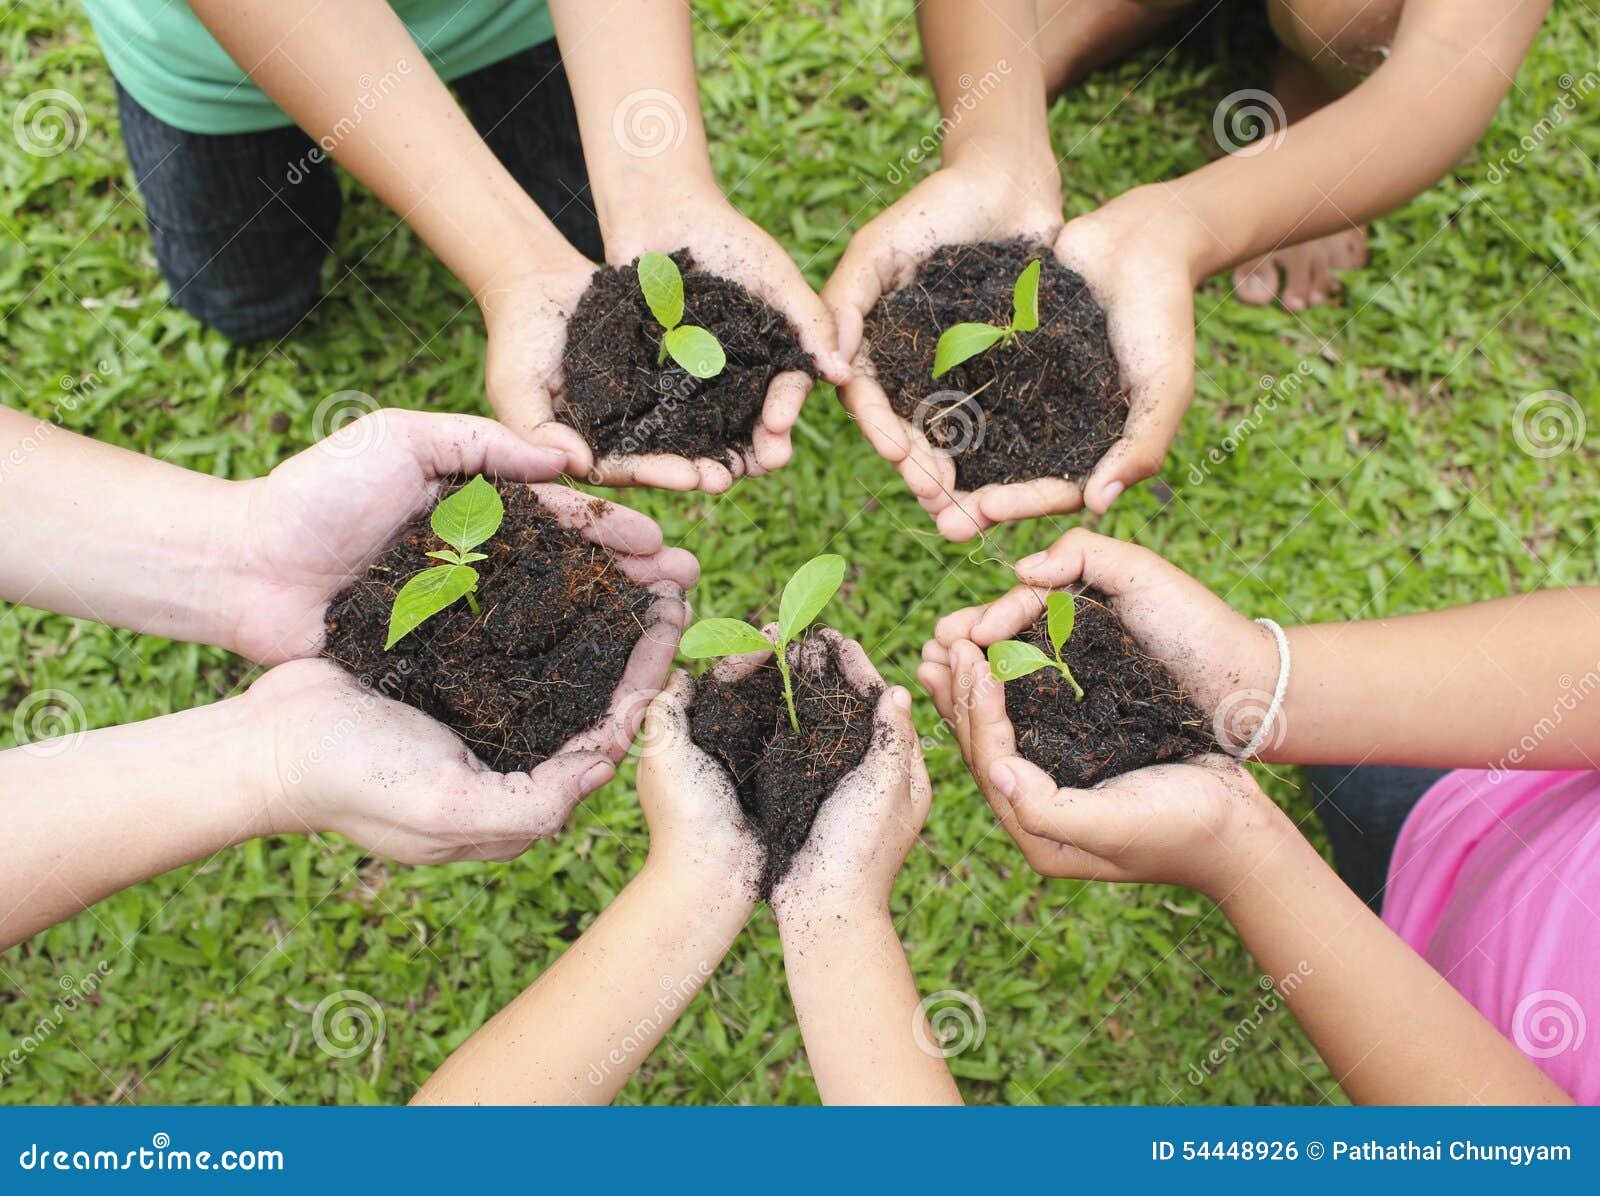 hands holding sapling in soil surface